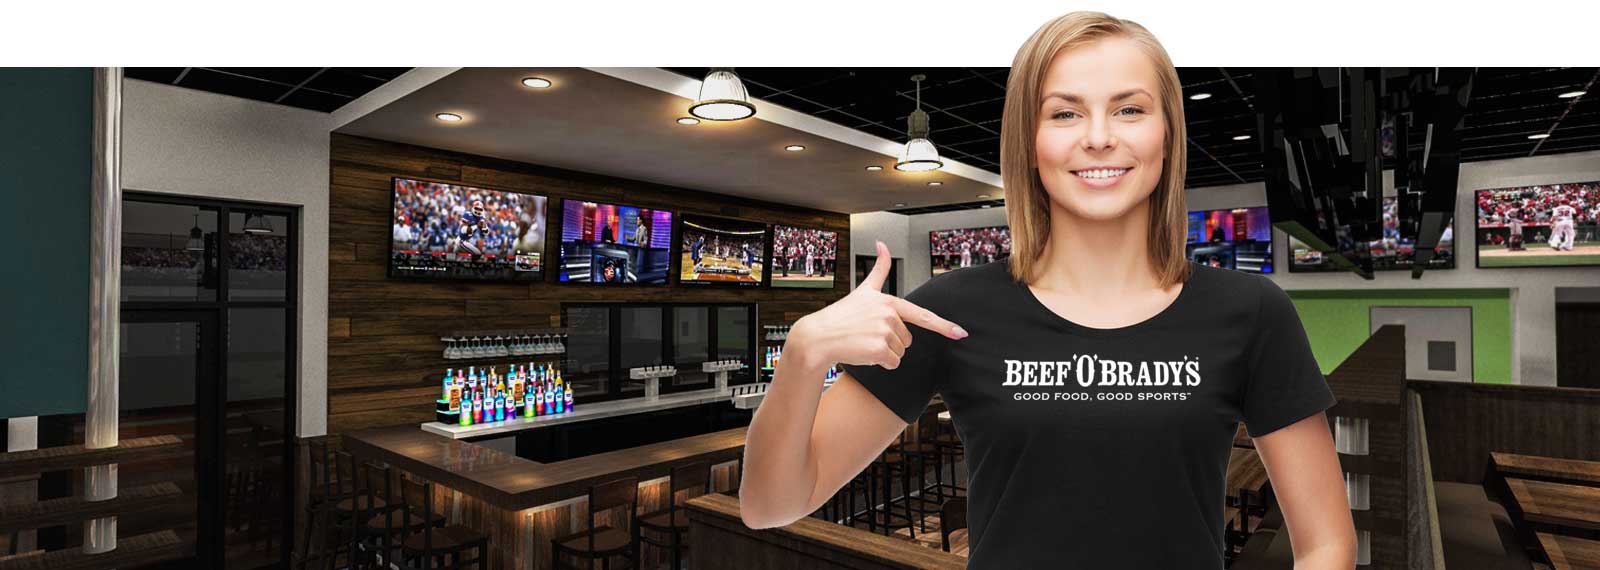 Beef O Brady's Franchise Support